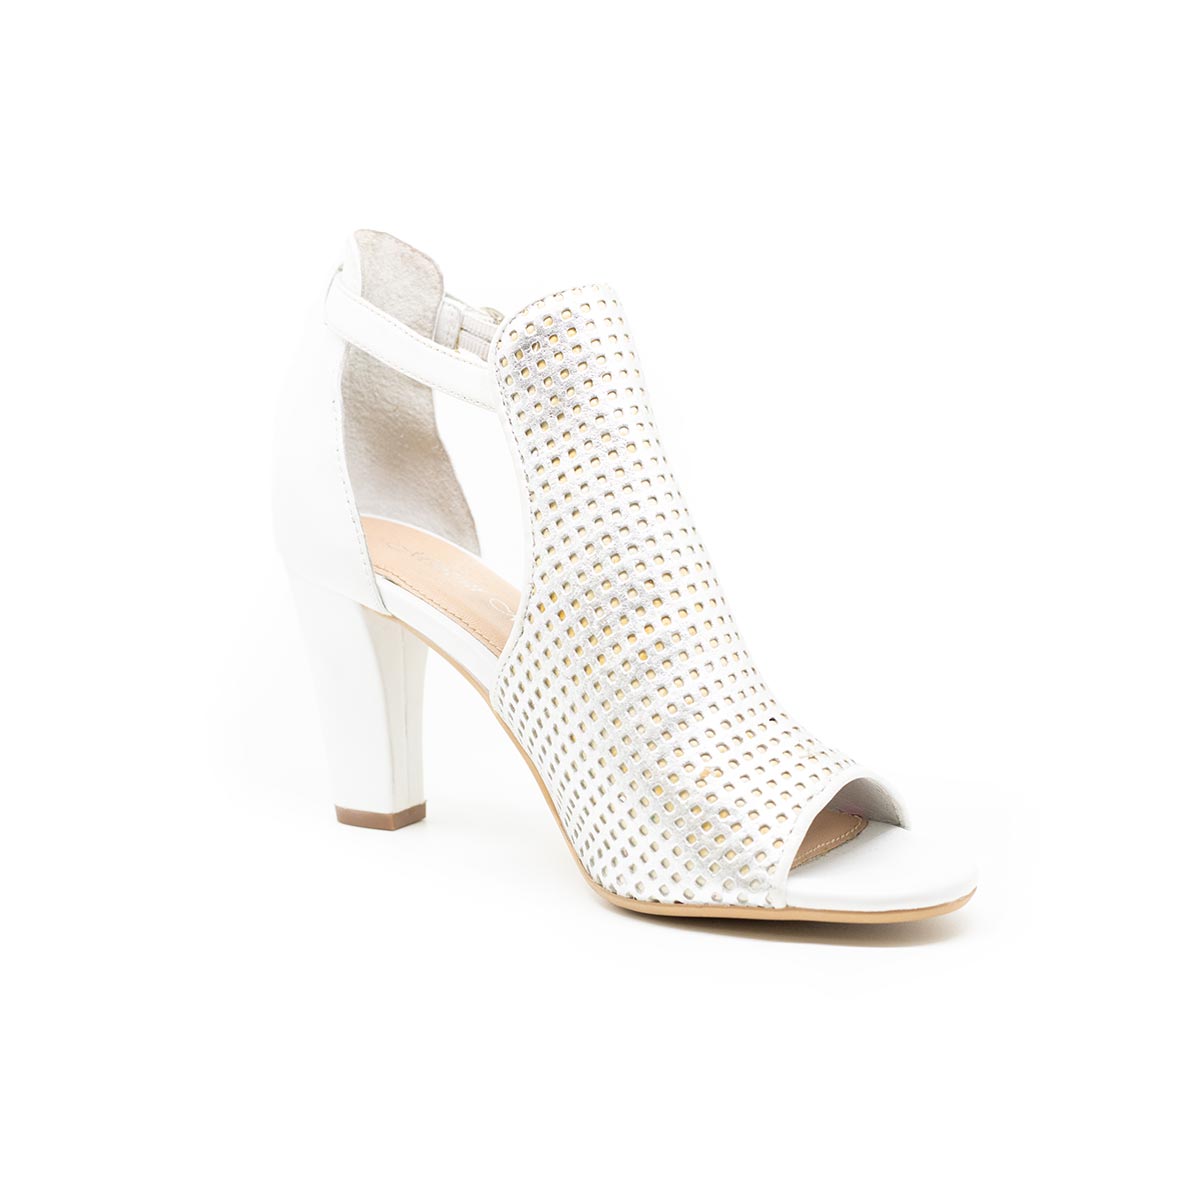 Martini Marco Keto KETO-5 - Clearance Shoes White / Silver / 7 / 38  Available at Illusions Lingerie